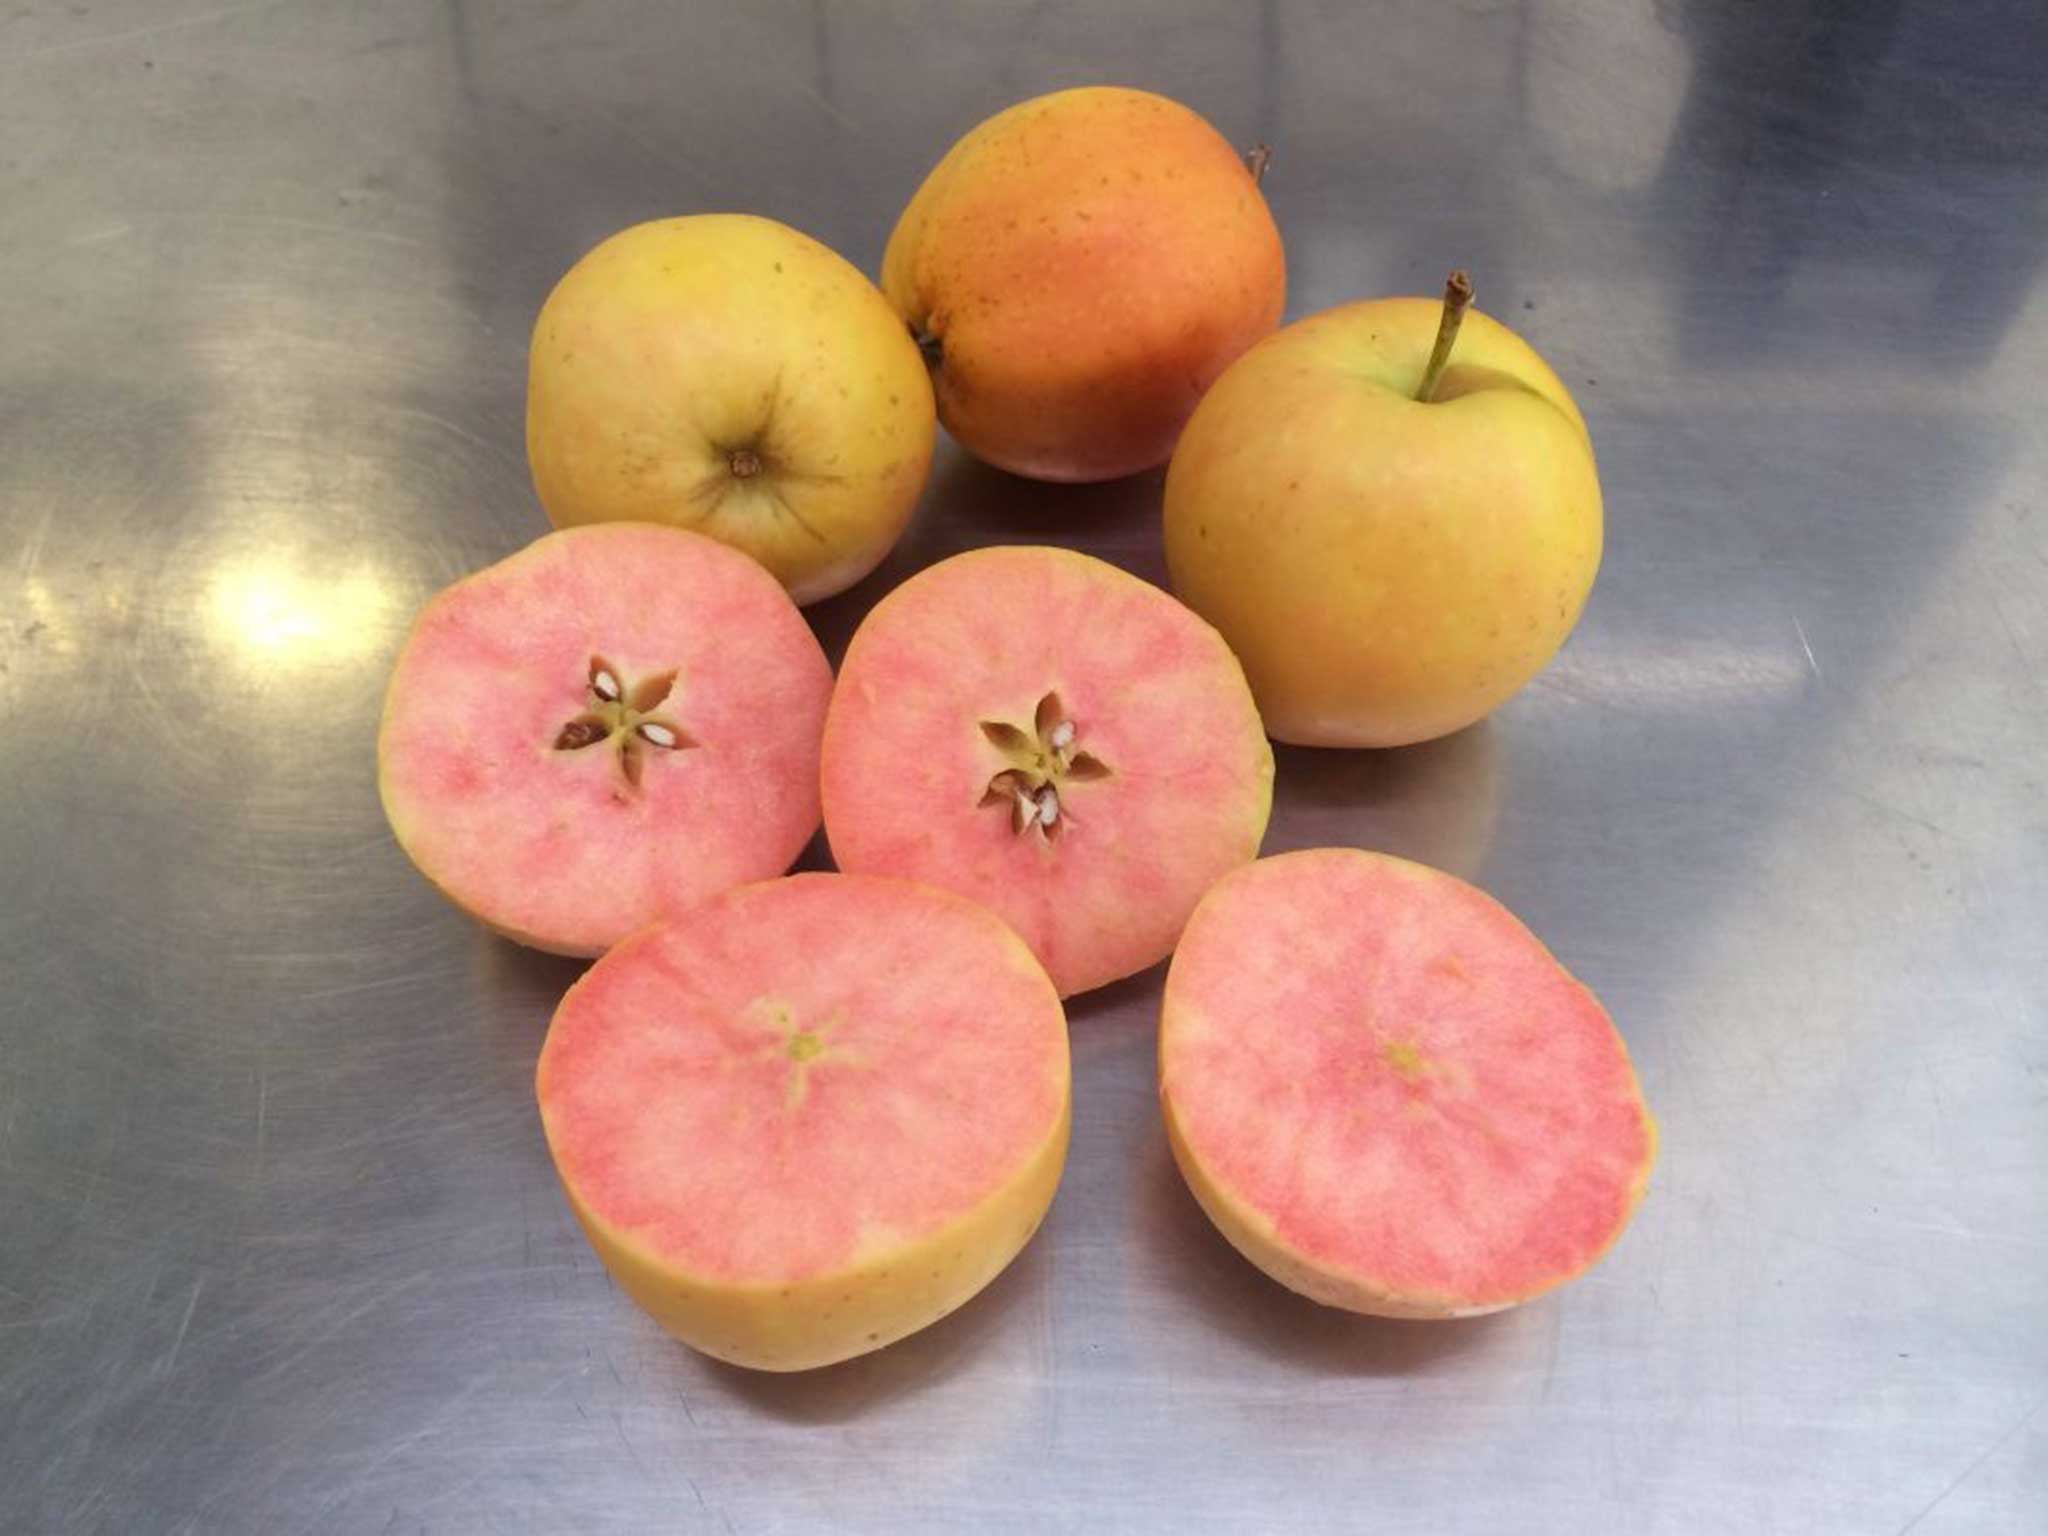 Surprize! Tesco sells apples that are pink inside, The Independent